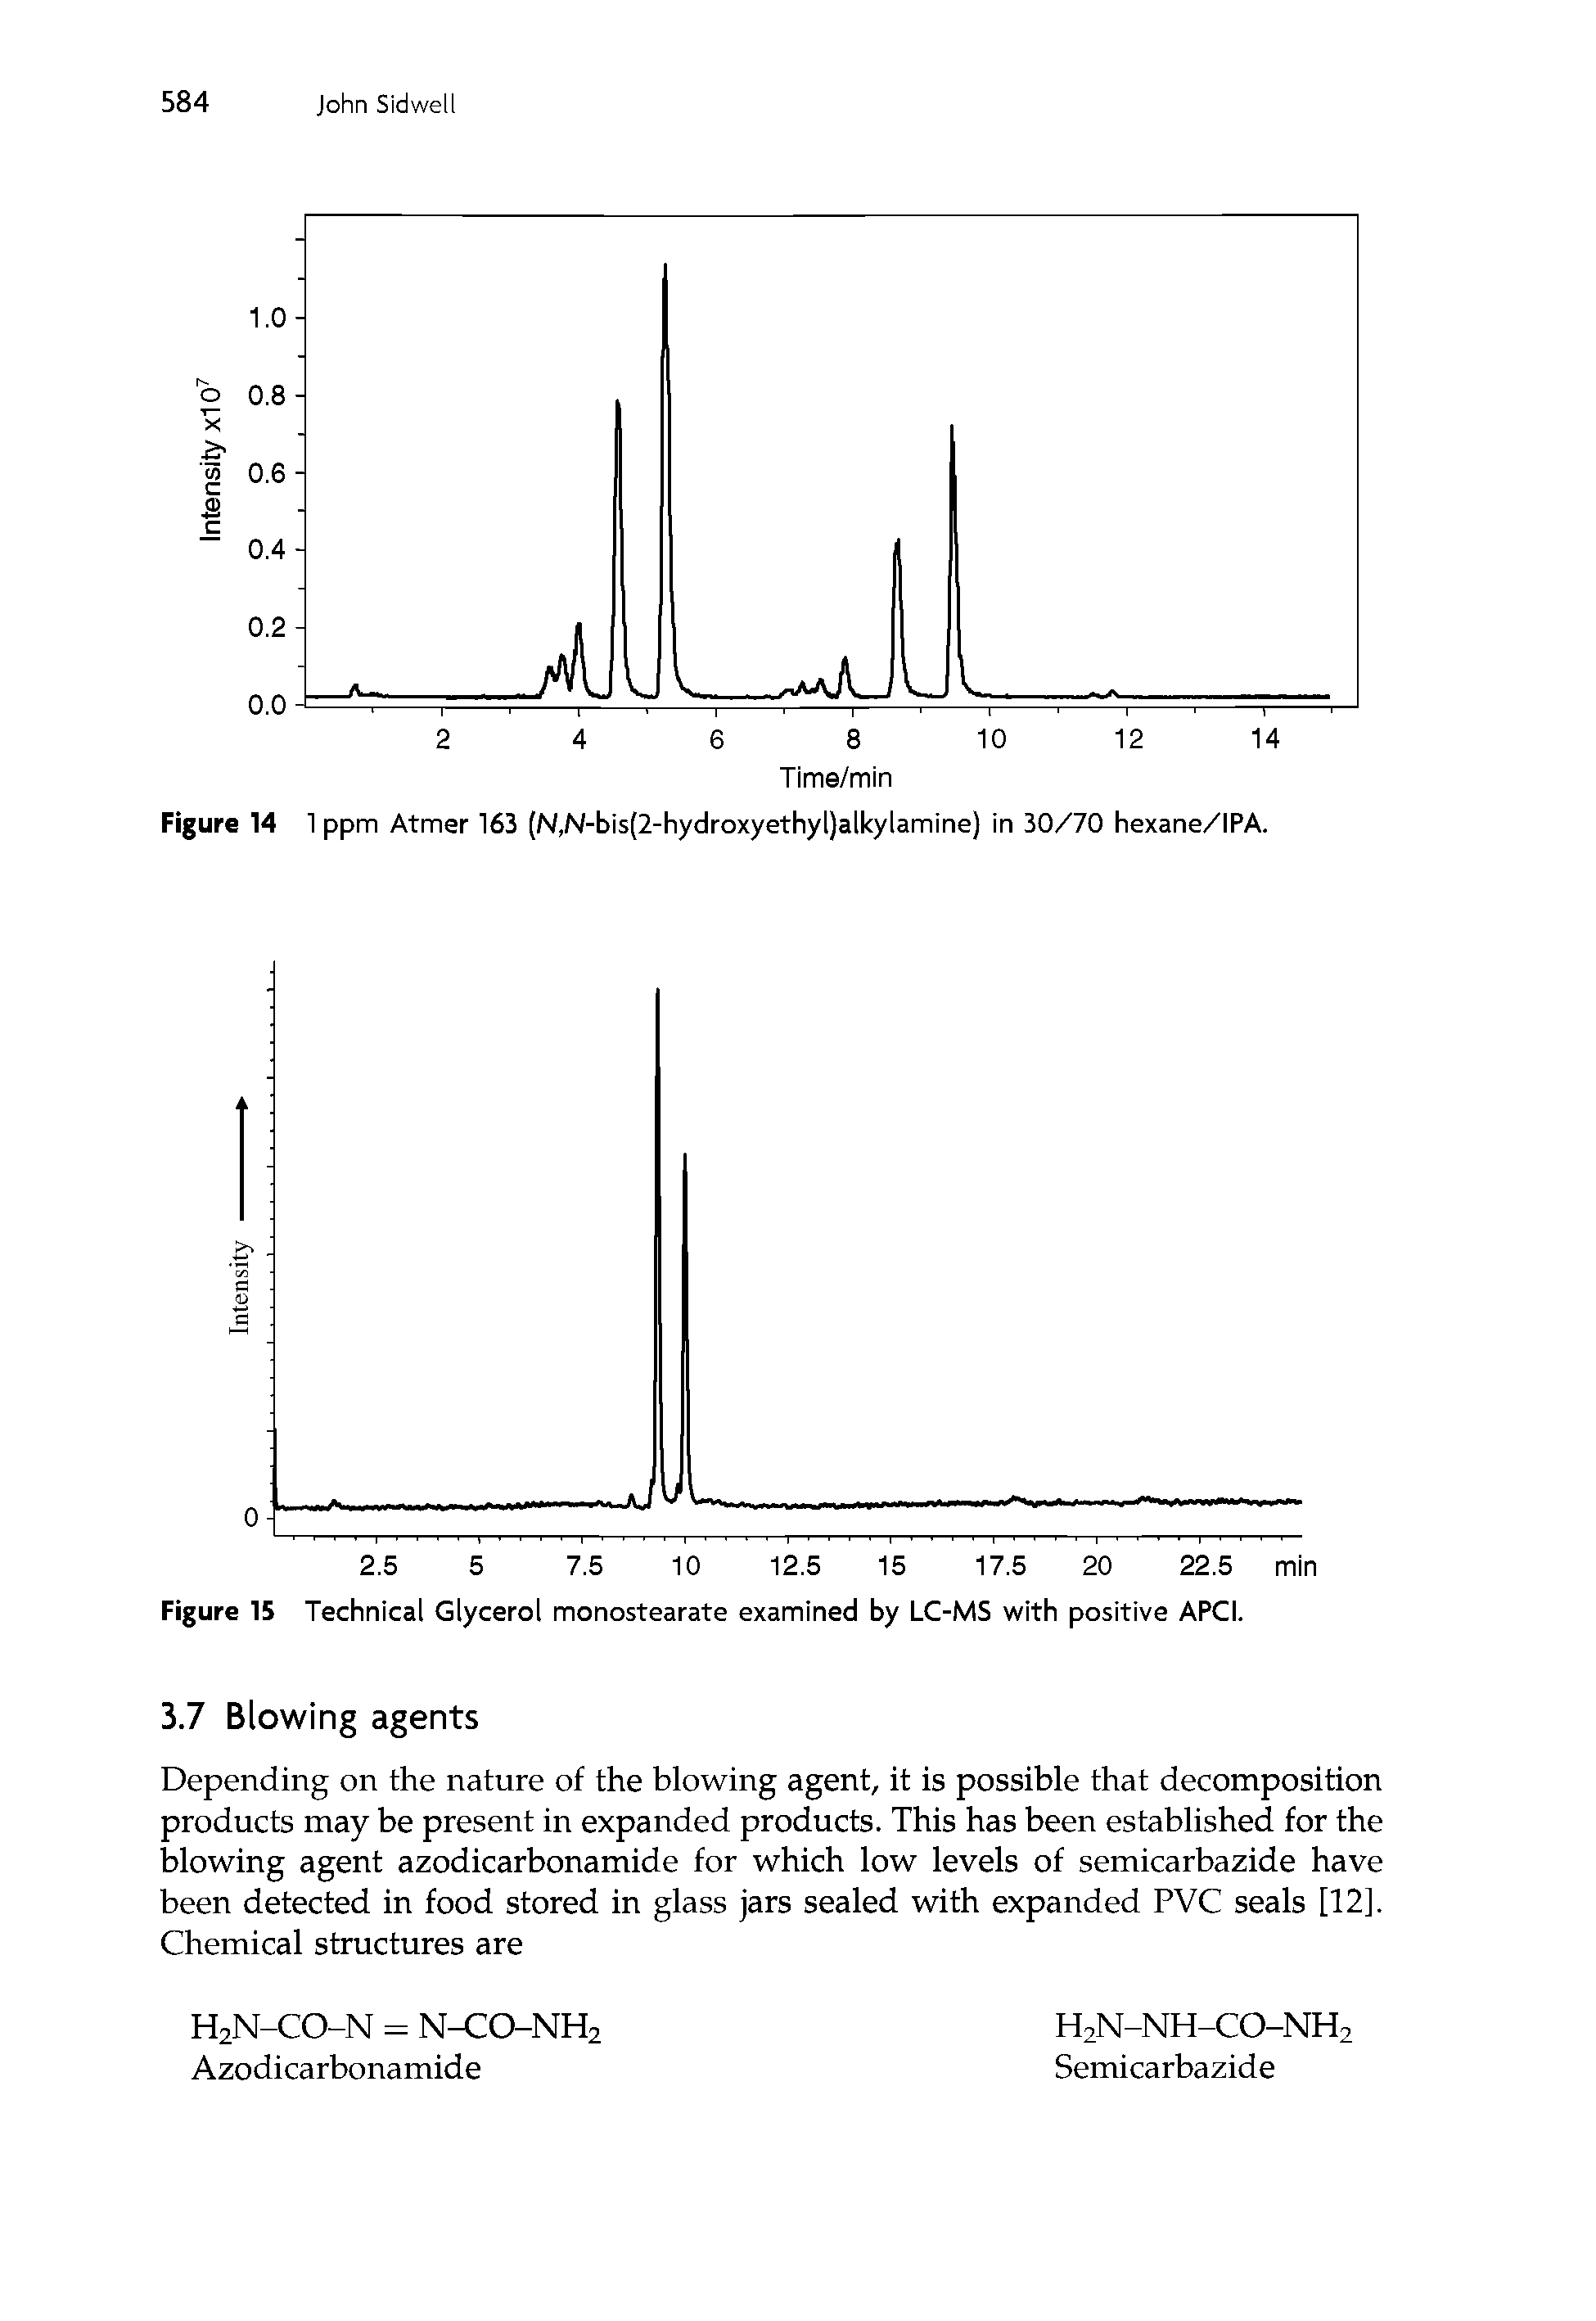 Figure 15 Technical Glycerol monostearate examined by LC-MS with positive APCI.